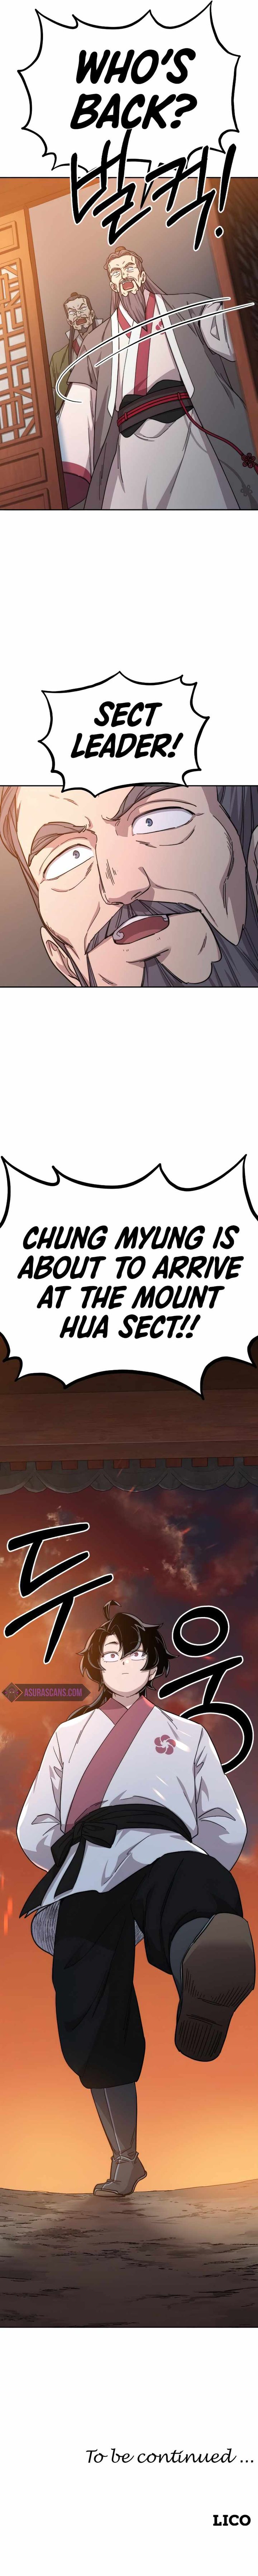 Return Of The Mount Hua Sect 32 16